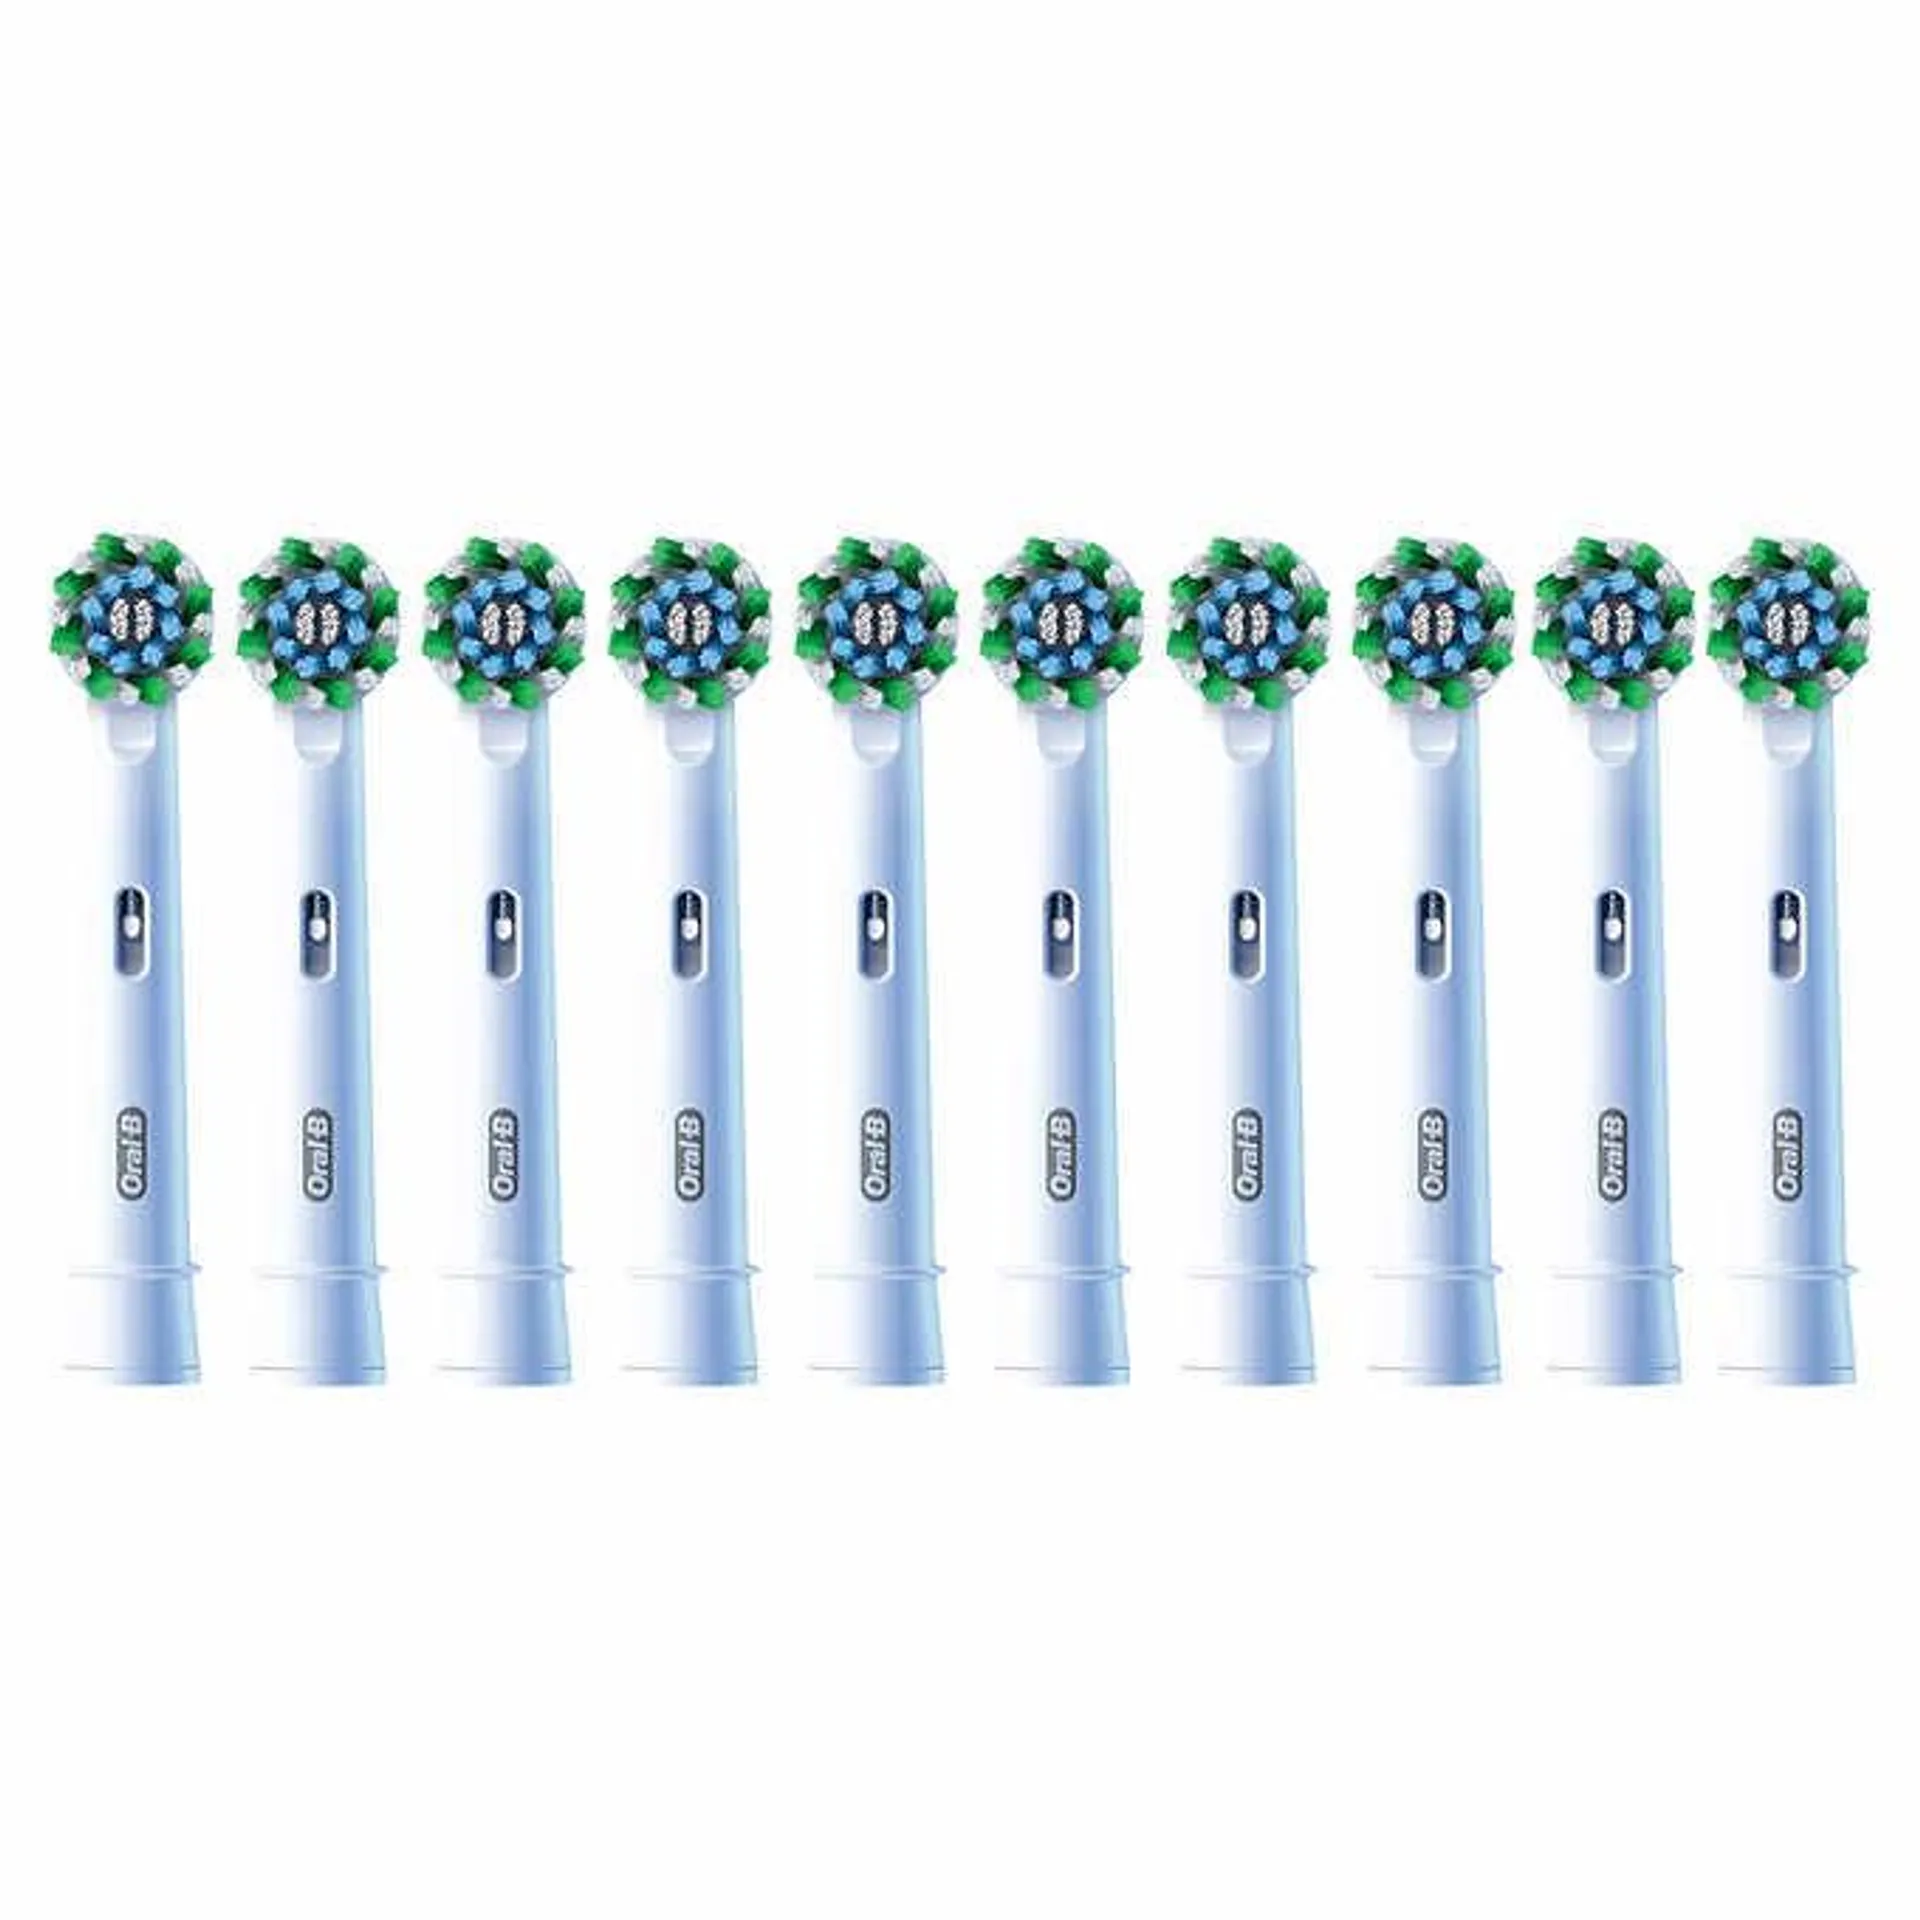 Oral-B Replacement Electric Toothbrush Heads, 10-count